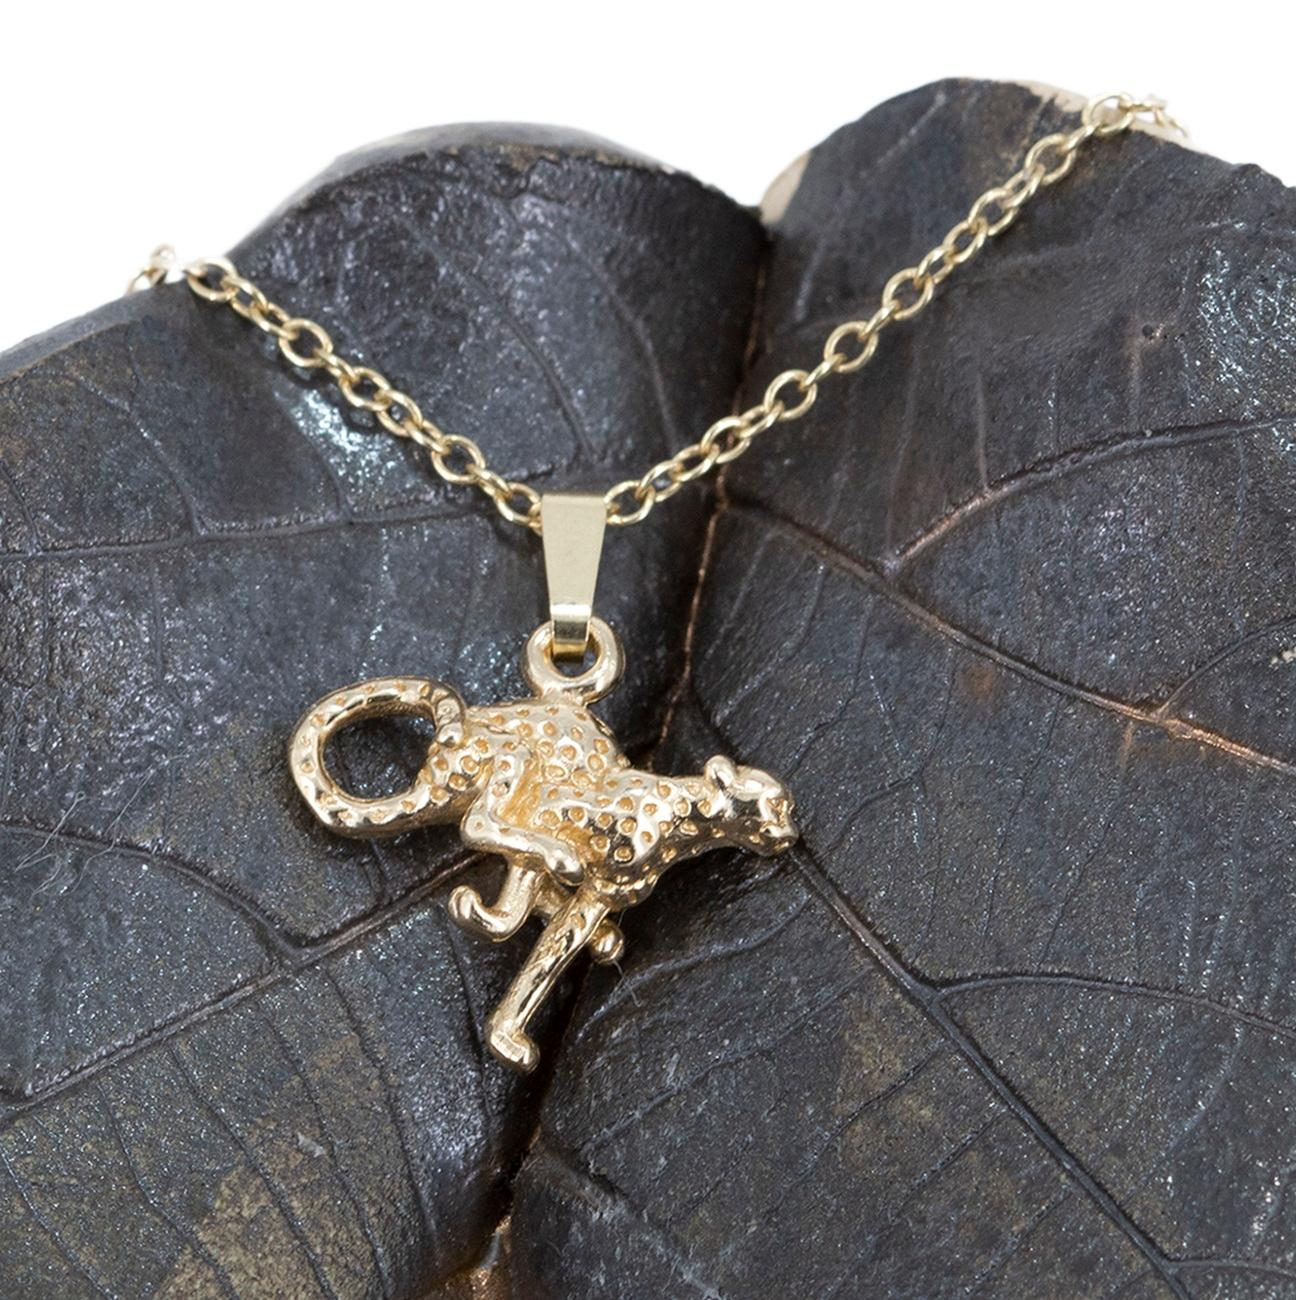 A beautiful solid 9 carat gold running Cheetah pendant with an 18